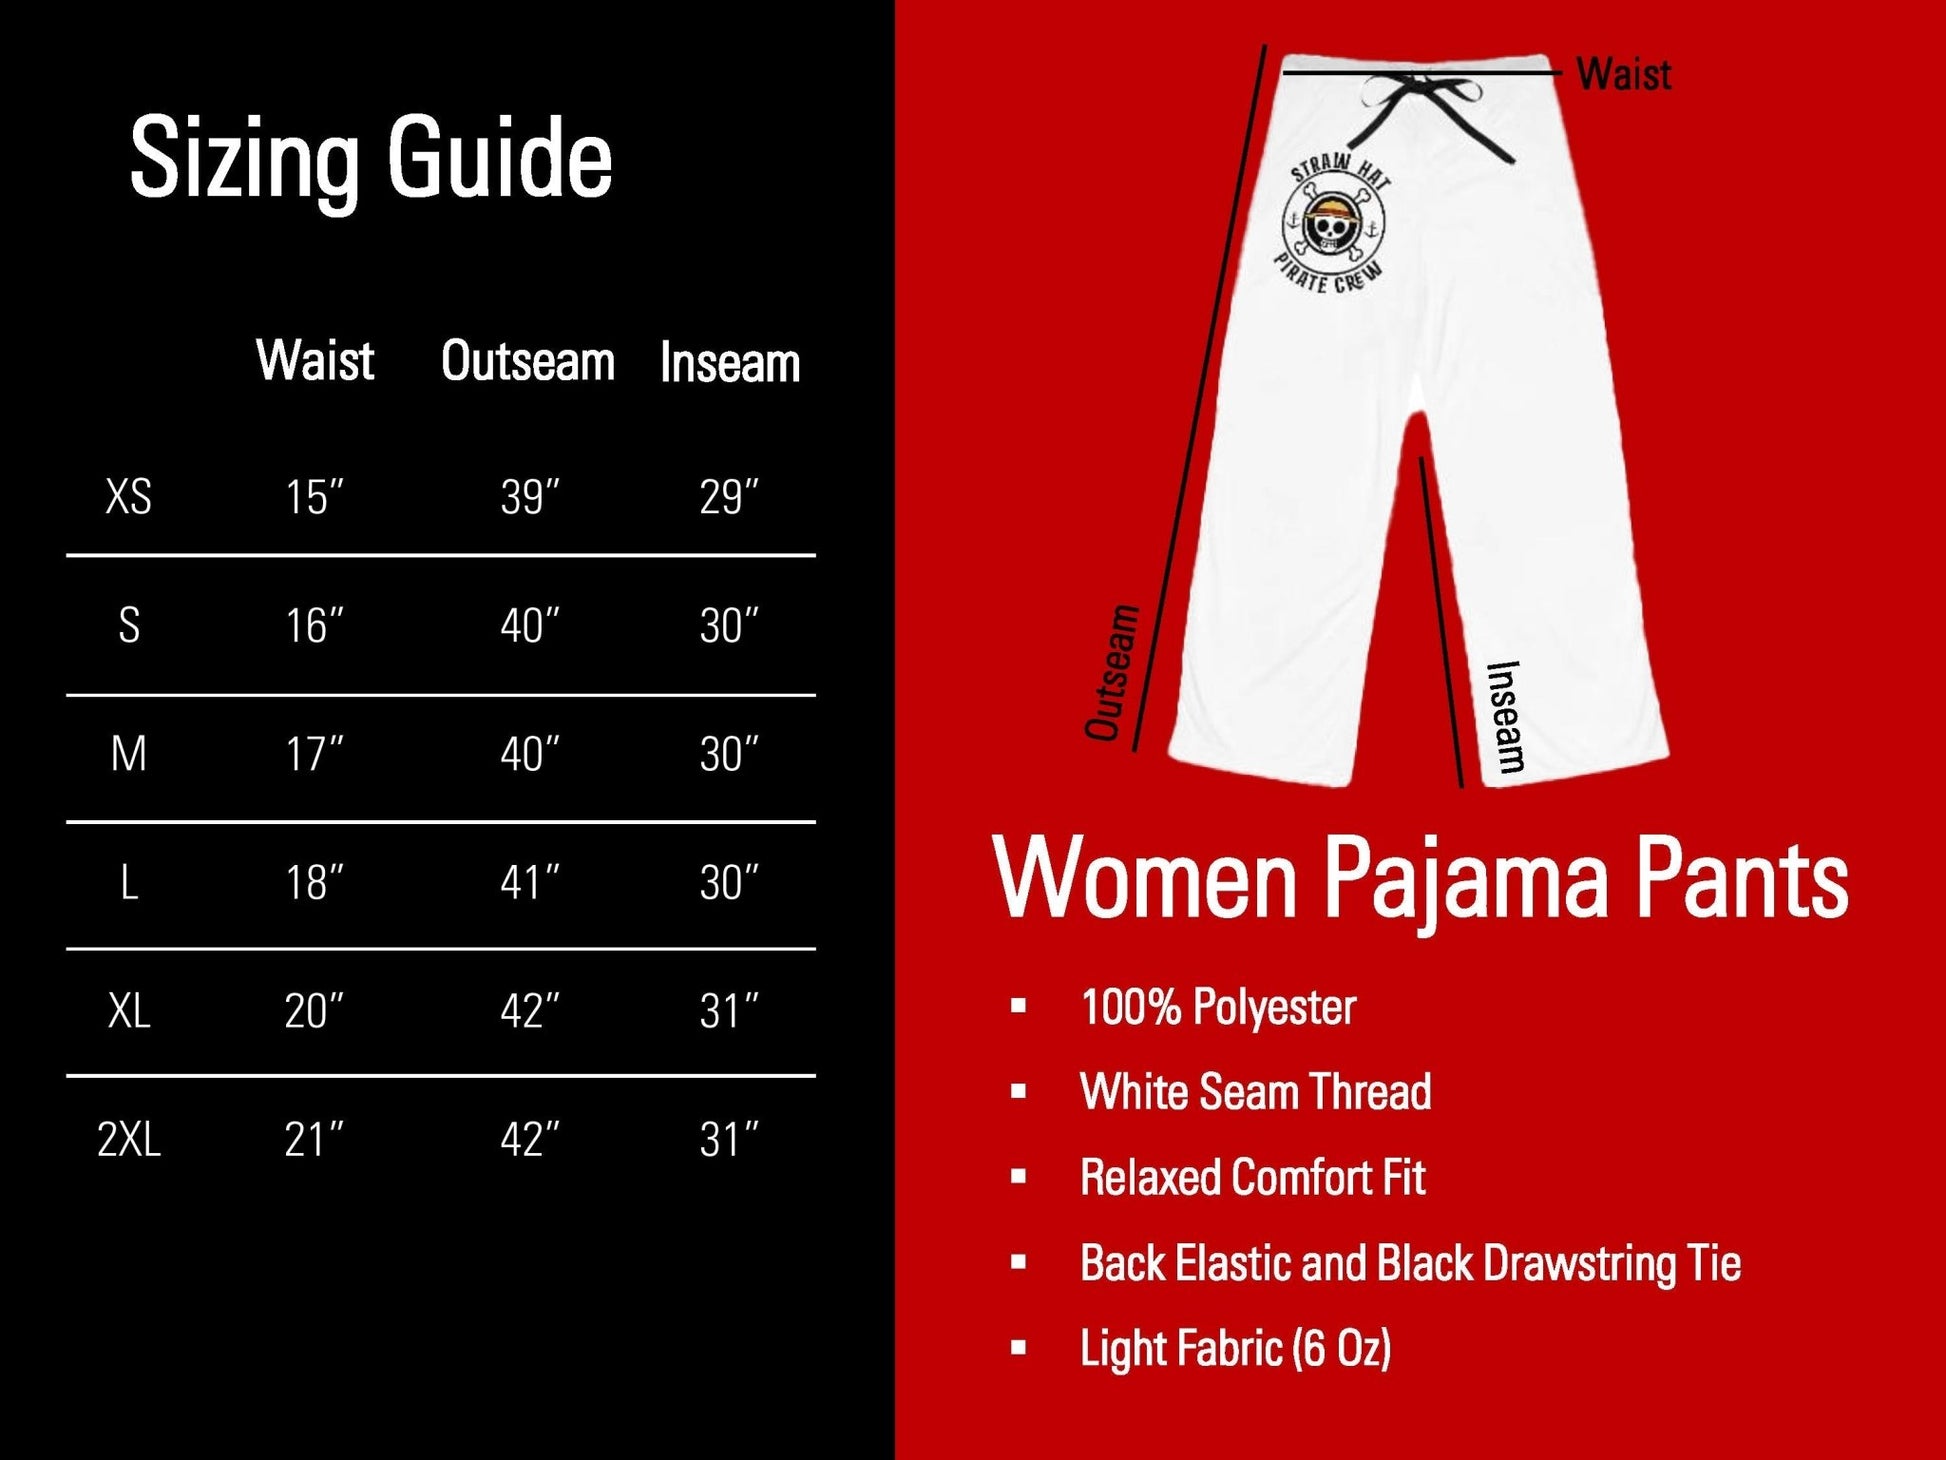 Water Element Women's Pajama Pants - One Punch Fits